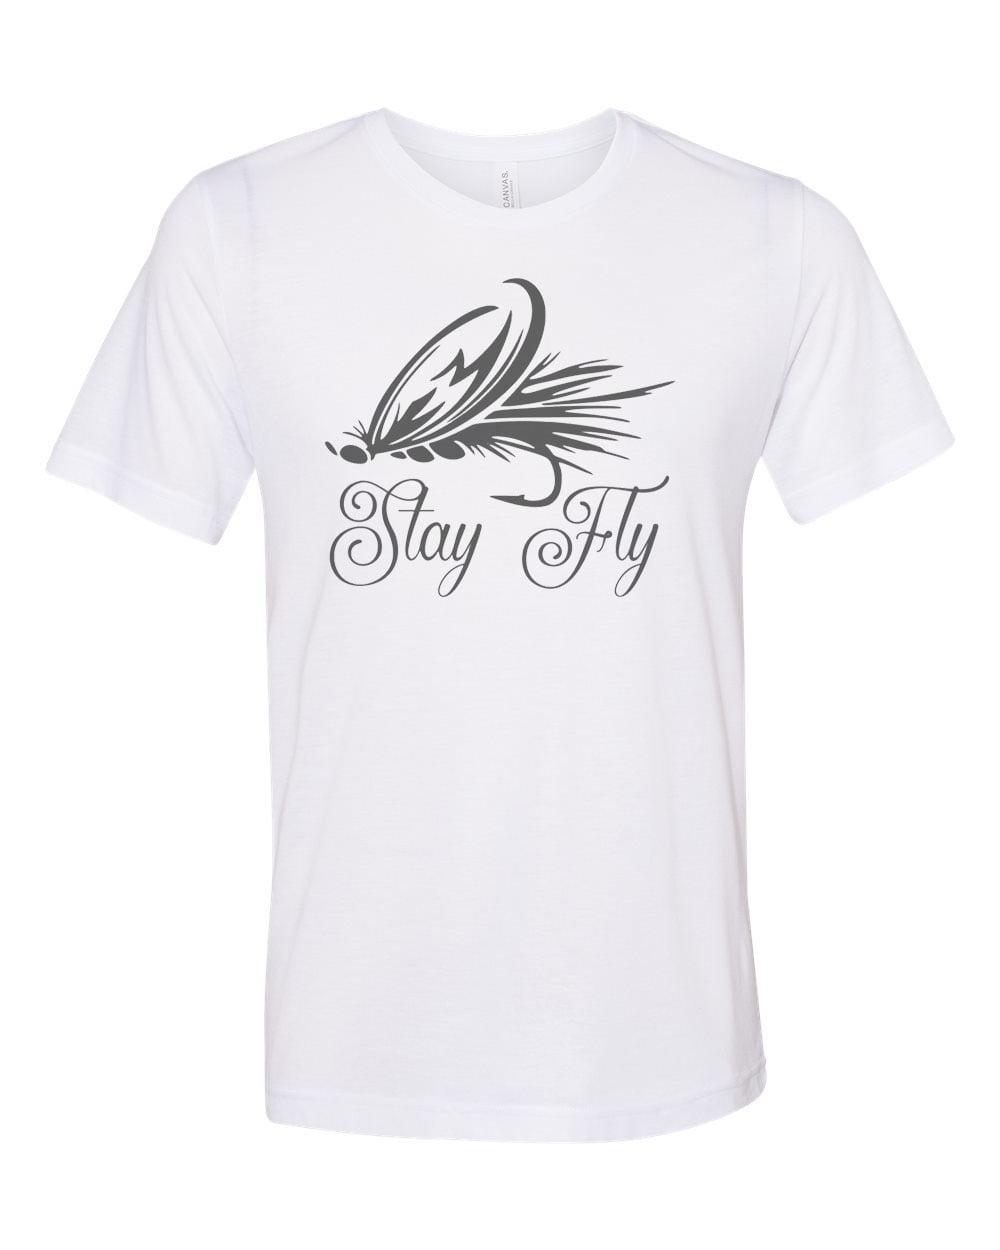 Fly Fishing Tee, Stay Fly, Fly Fishing Shirt, Sublimation T, Men's Fishing  Tshirt, Gift For Him, Dad T, Fishing Apparel, Trout Fishing, White, LARGE